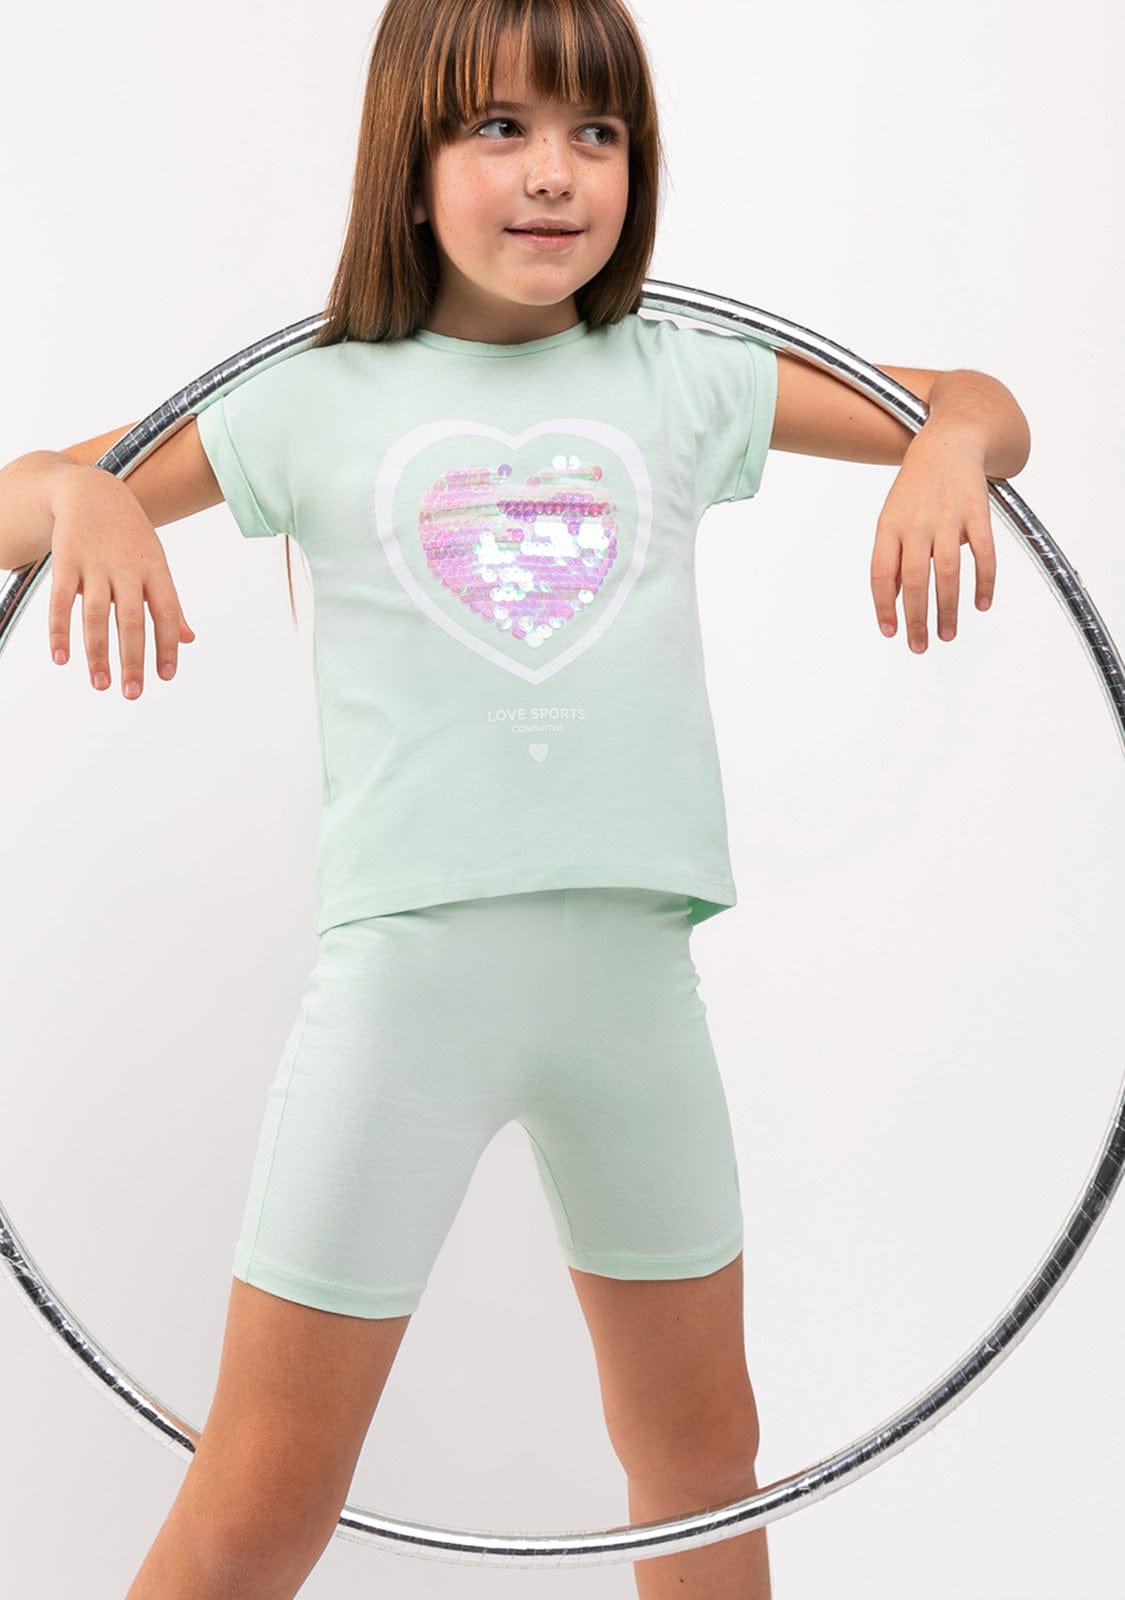 CONGUITOS TEXTIL Clothing Girl's Mint Heart Outfit